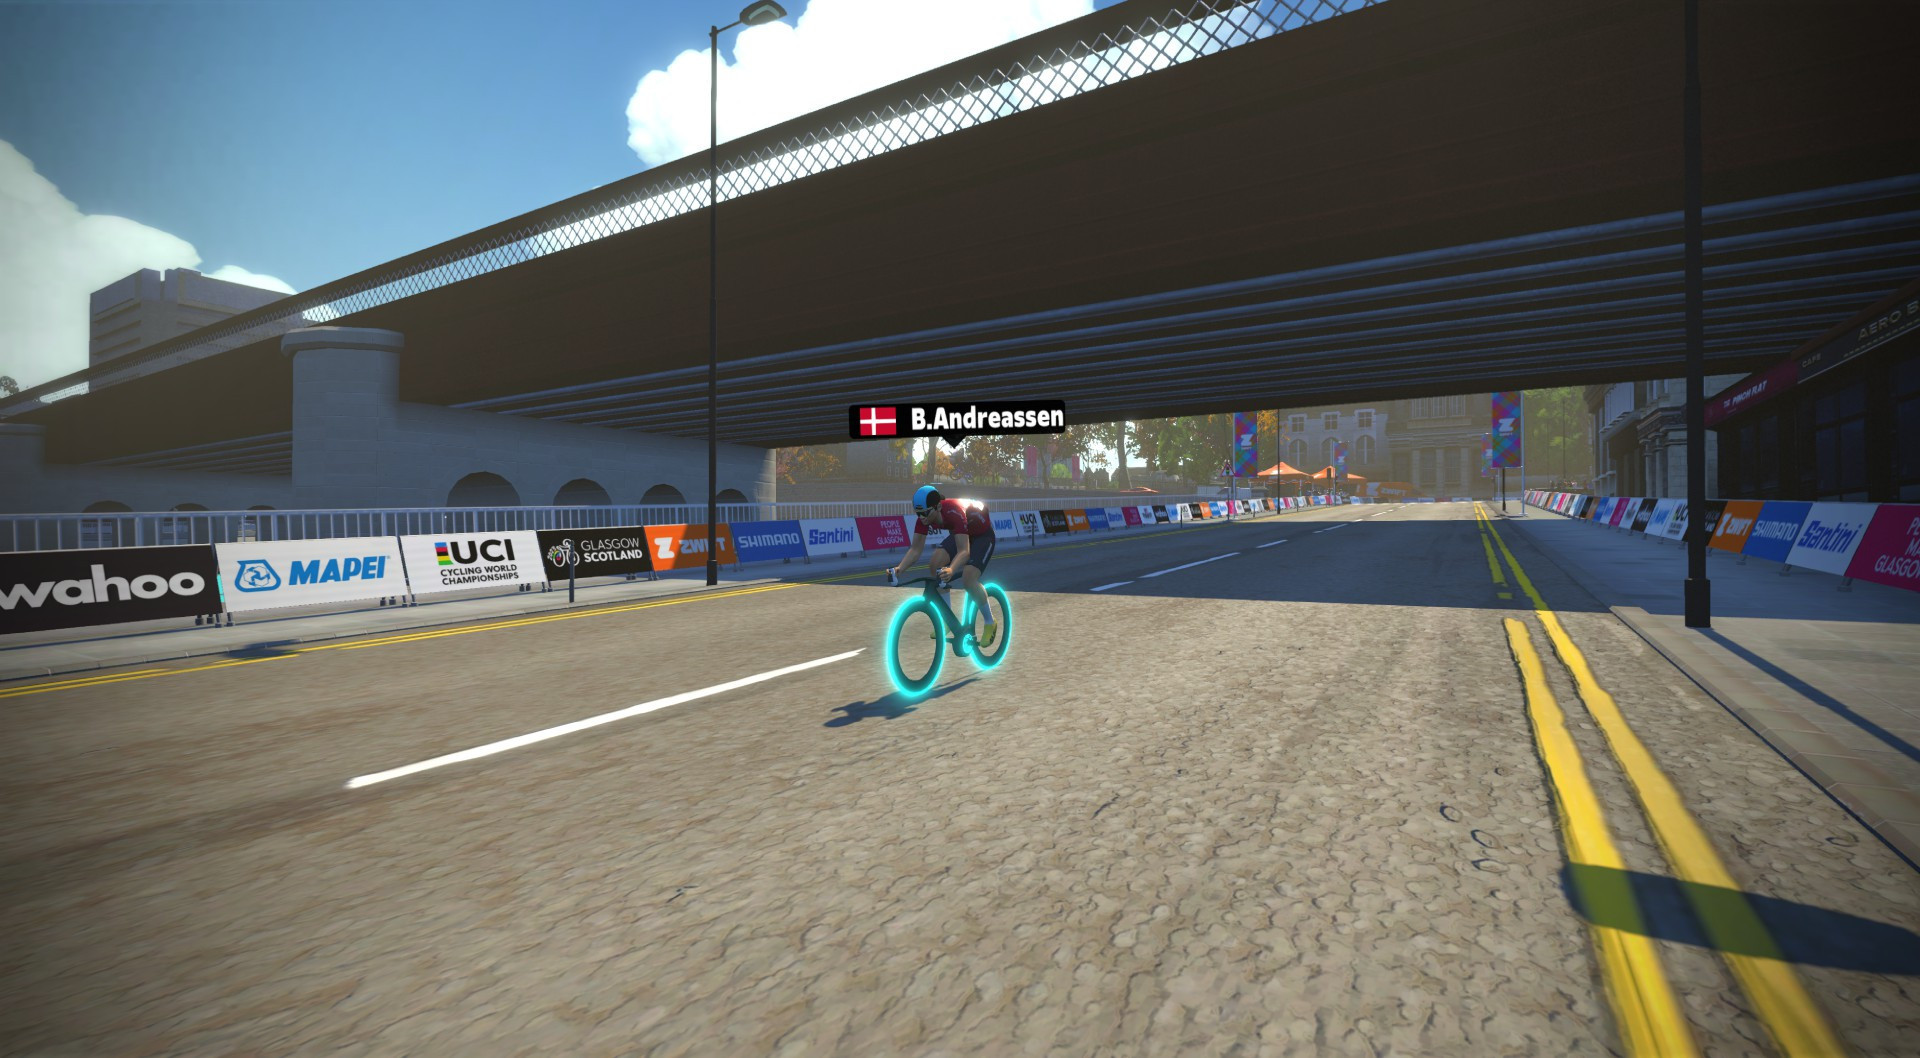 Denmark's Bjørn Andreasson's early attack proved decisive to win the men's podium race ©Zwift